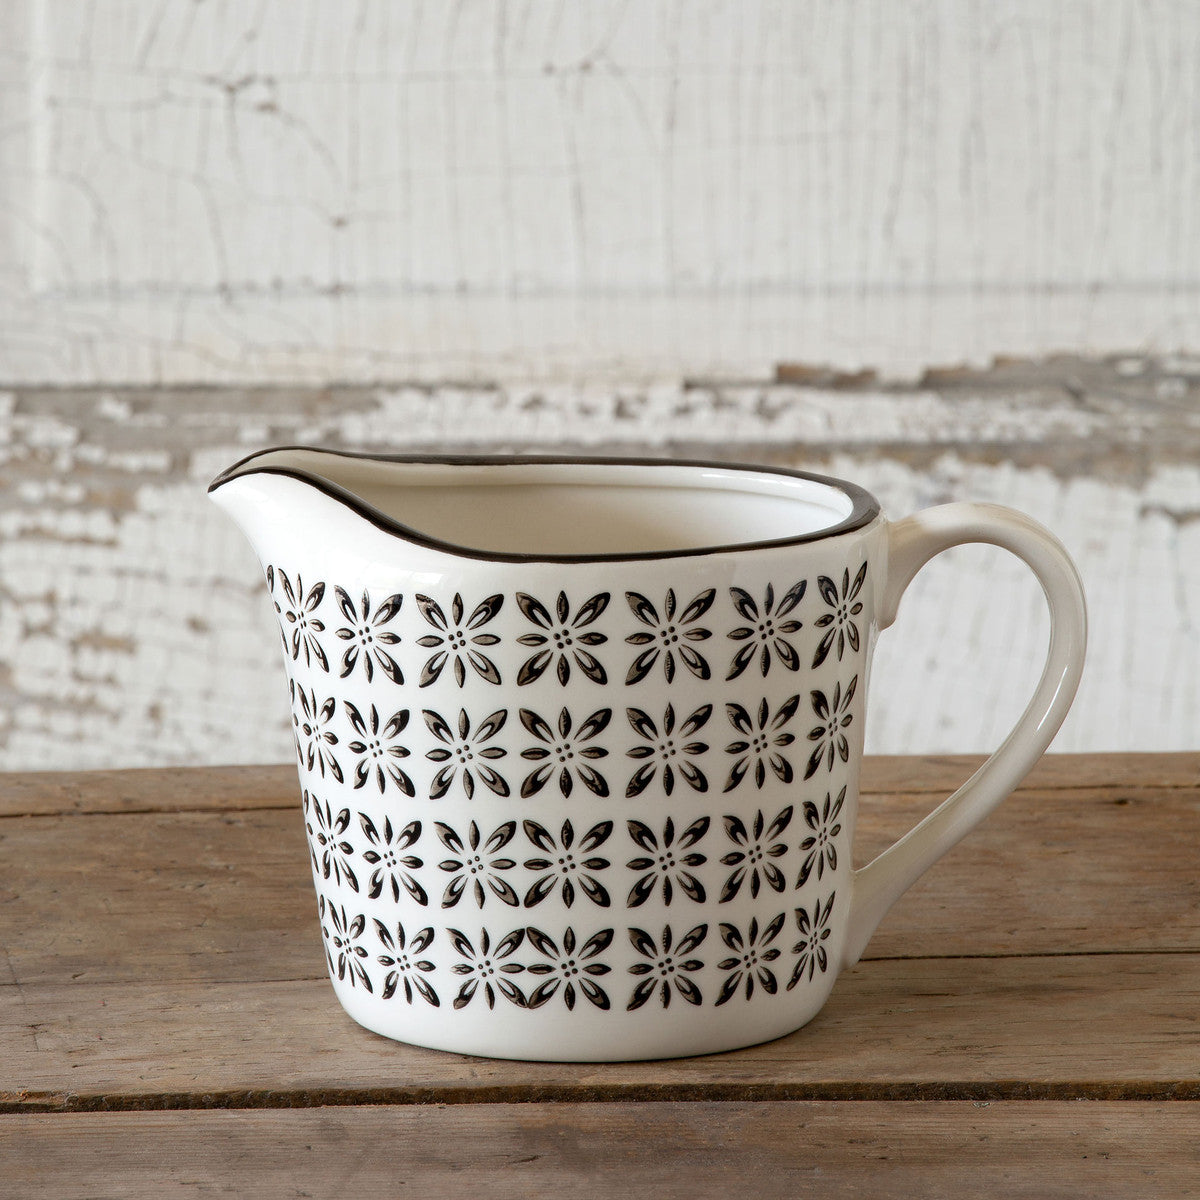 Norden Pattern Measuring Cup - Small Town Home & Decor